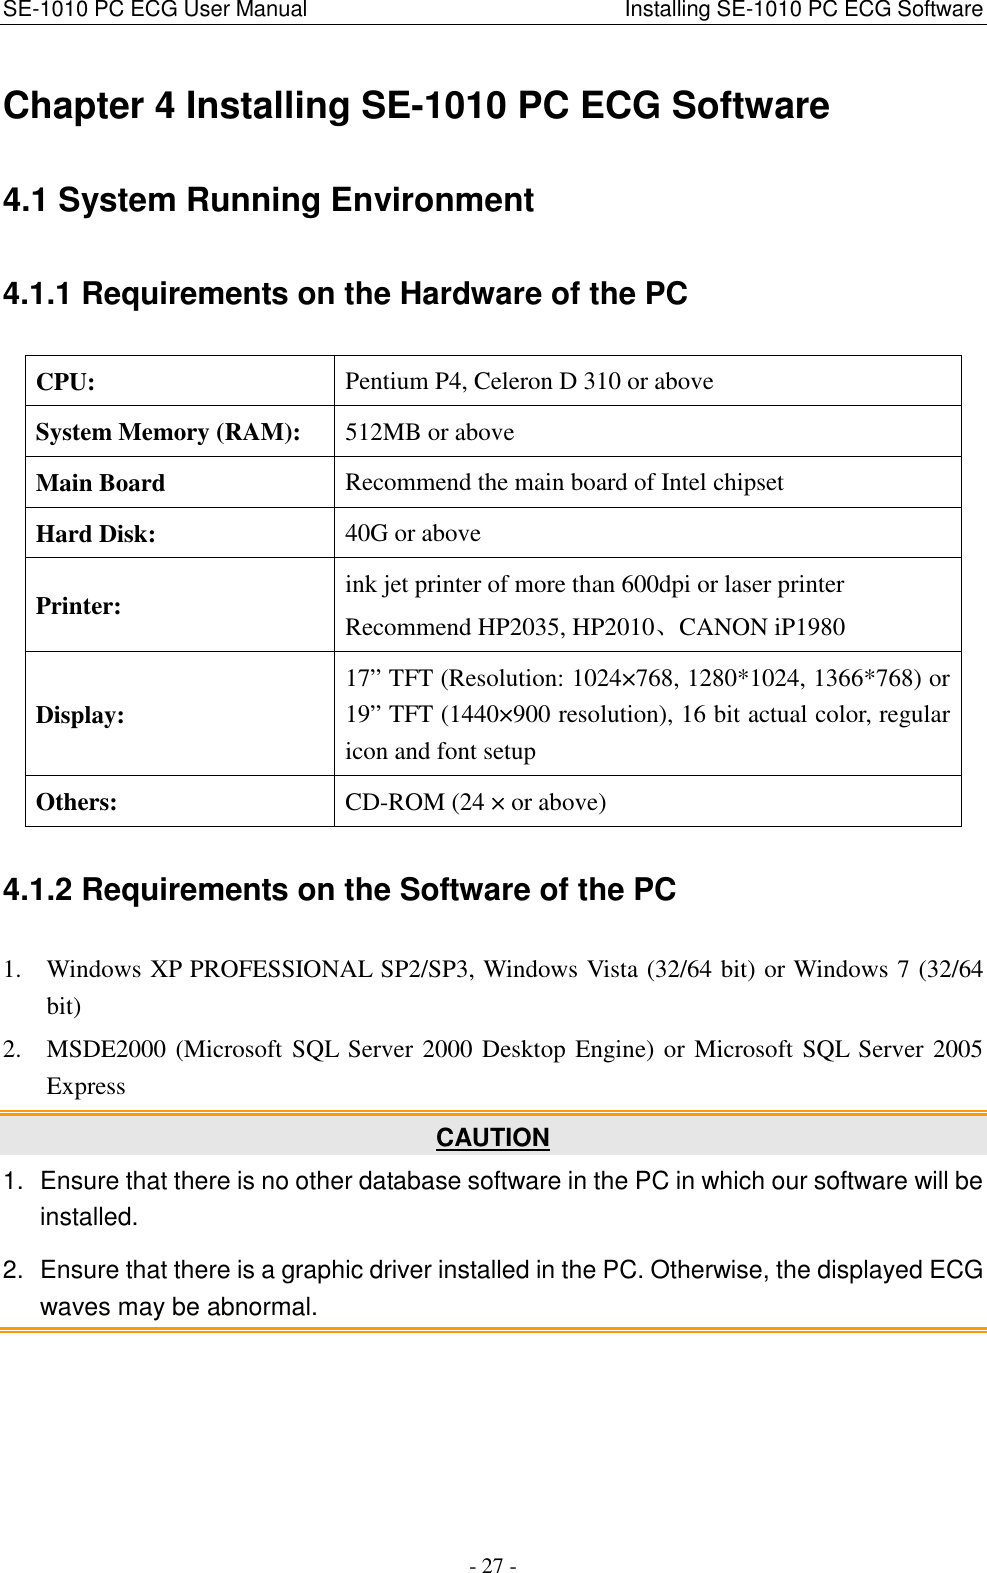 SE-1010 PC ECG User Manual                                                          Installing SE-1010 PC ECG Software - 27 - Chapter 4 Installing SE-1010 PC ECG Software 4.1 System Running Environment 4.1.1 Requirements on the Hardware of the PC CPU:  Pentium P4, Celeron D 310 or above System Memory (RAM):  512MB or above Main Board  Recommend the main board of Intel chipset Hard Disk:  40G or above Printer:  ink jet printer of more than 600dpi or laser printer Recommend HP2035, HP2010、CANON iP1980 Display: 17” TFT (Resolution: 1024×768, 1280*1024, 1366*768) or 19” TFT (1440×900 resolution), 16 bit actual color, regular icon and font setup Others:  CD-ROM (24 × or above) 4.1.2 Requirements on the Software of the PC 1. Windows XP PROFESSIONAL SP2/SP3, Windows Vista (32/64 bit) or Windows 7 (32/64 bit) 2. MSDE2000 (Microsoft SQL Server 2000 Desktop Engine) or Microsoft SQL Server 2005 Express CAUTION 1.  Ensure that there is no other database software in the PC in which our software will be installed. 2.  Ensure that there is a graphic driver installed in the PC. Otherwise, the displayed ECG waves may be abnormal. 